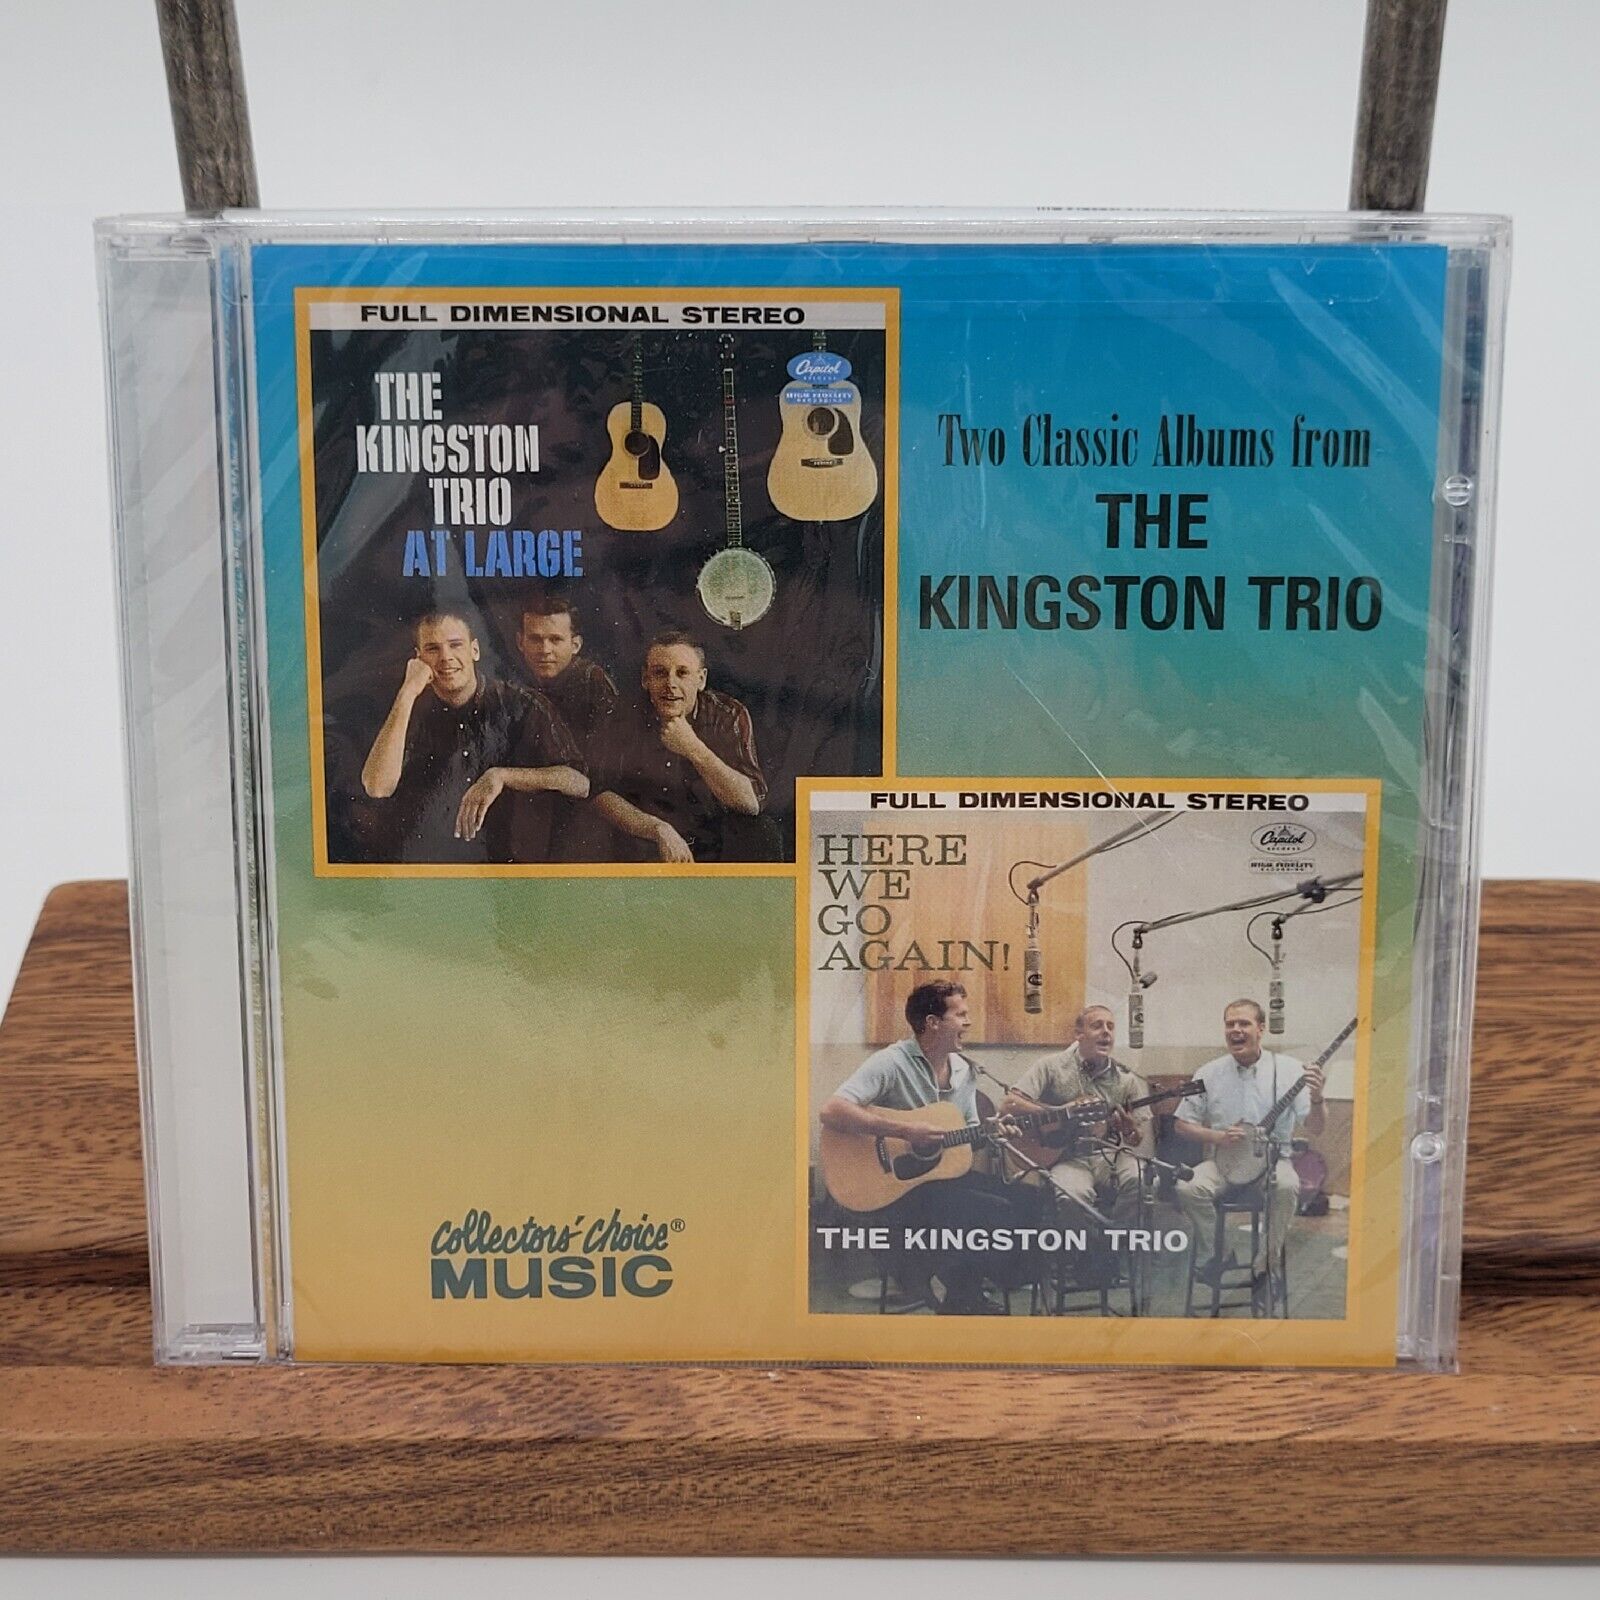 Sealed New Old Stock CD The Kingston Trio at Large / Here We Go Again 